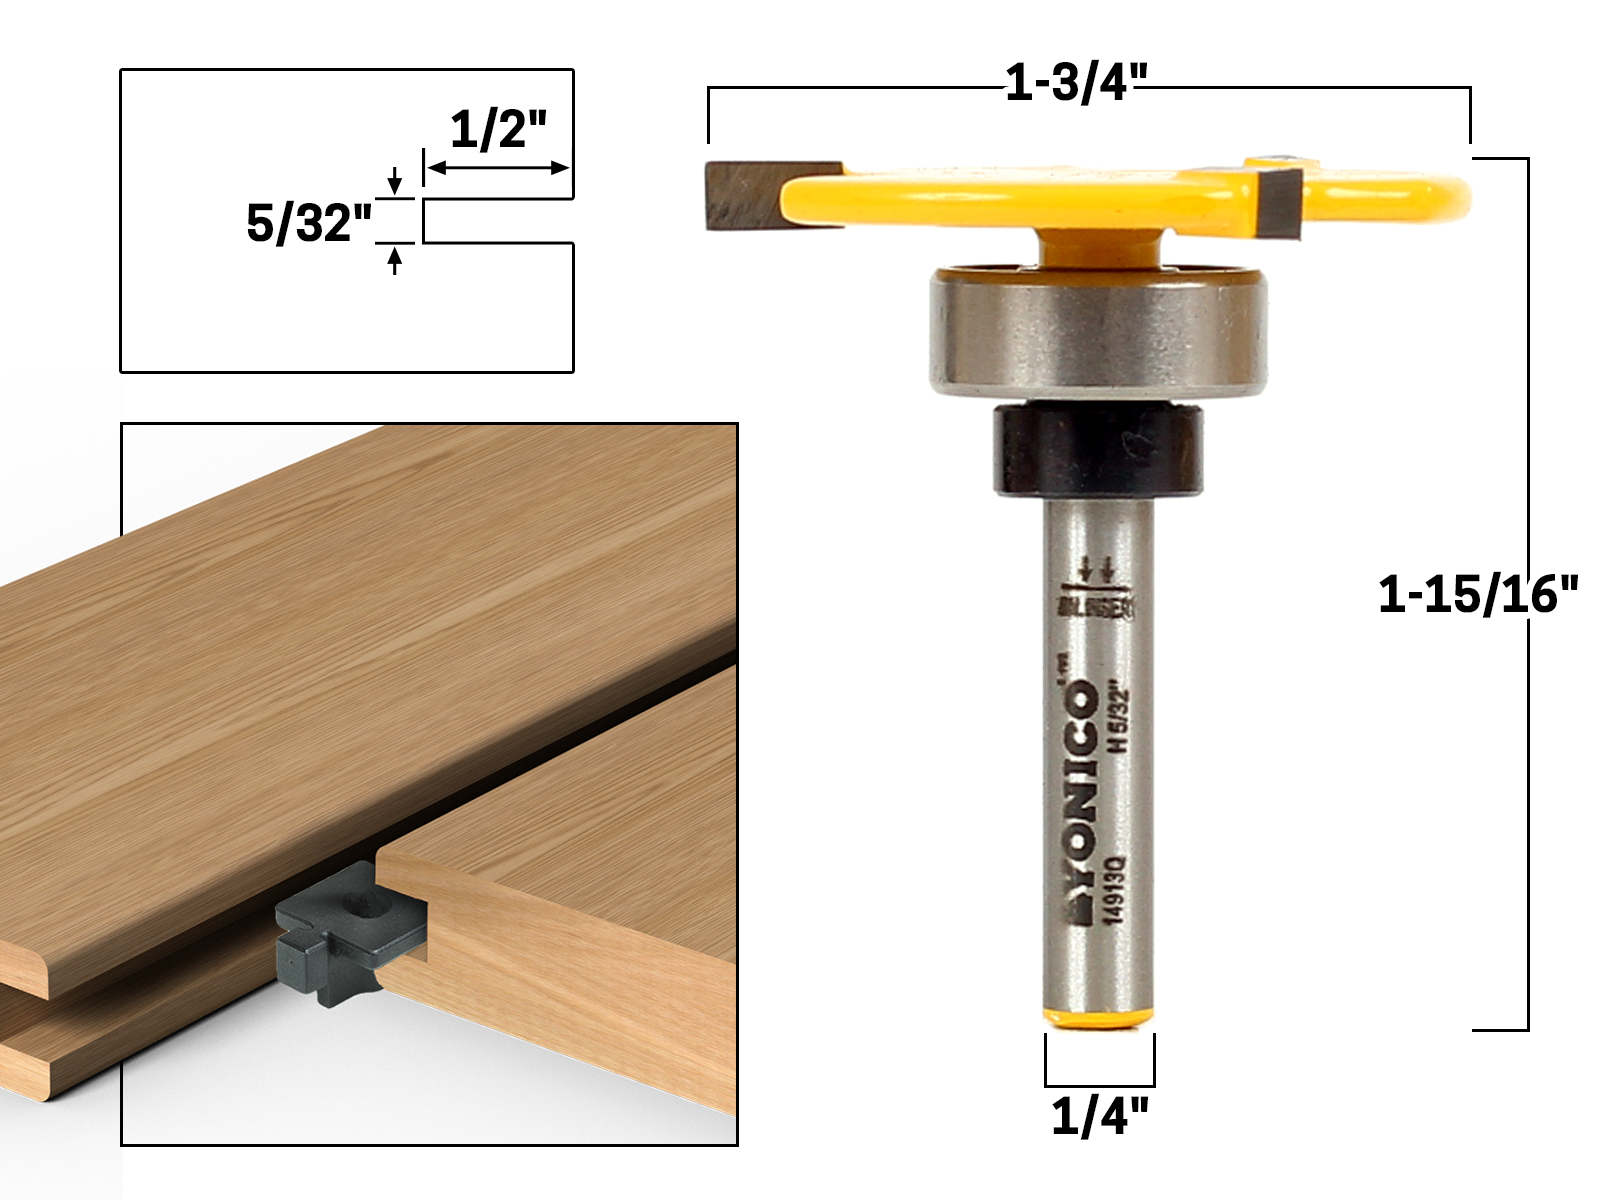 1 pc 1/2 SH Biscuit #20 Slotting 5/32x1/2 Joint Assembly Router Bit 